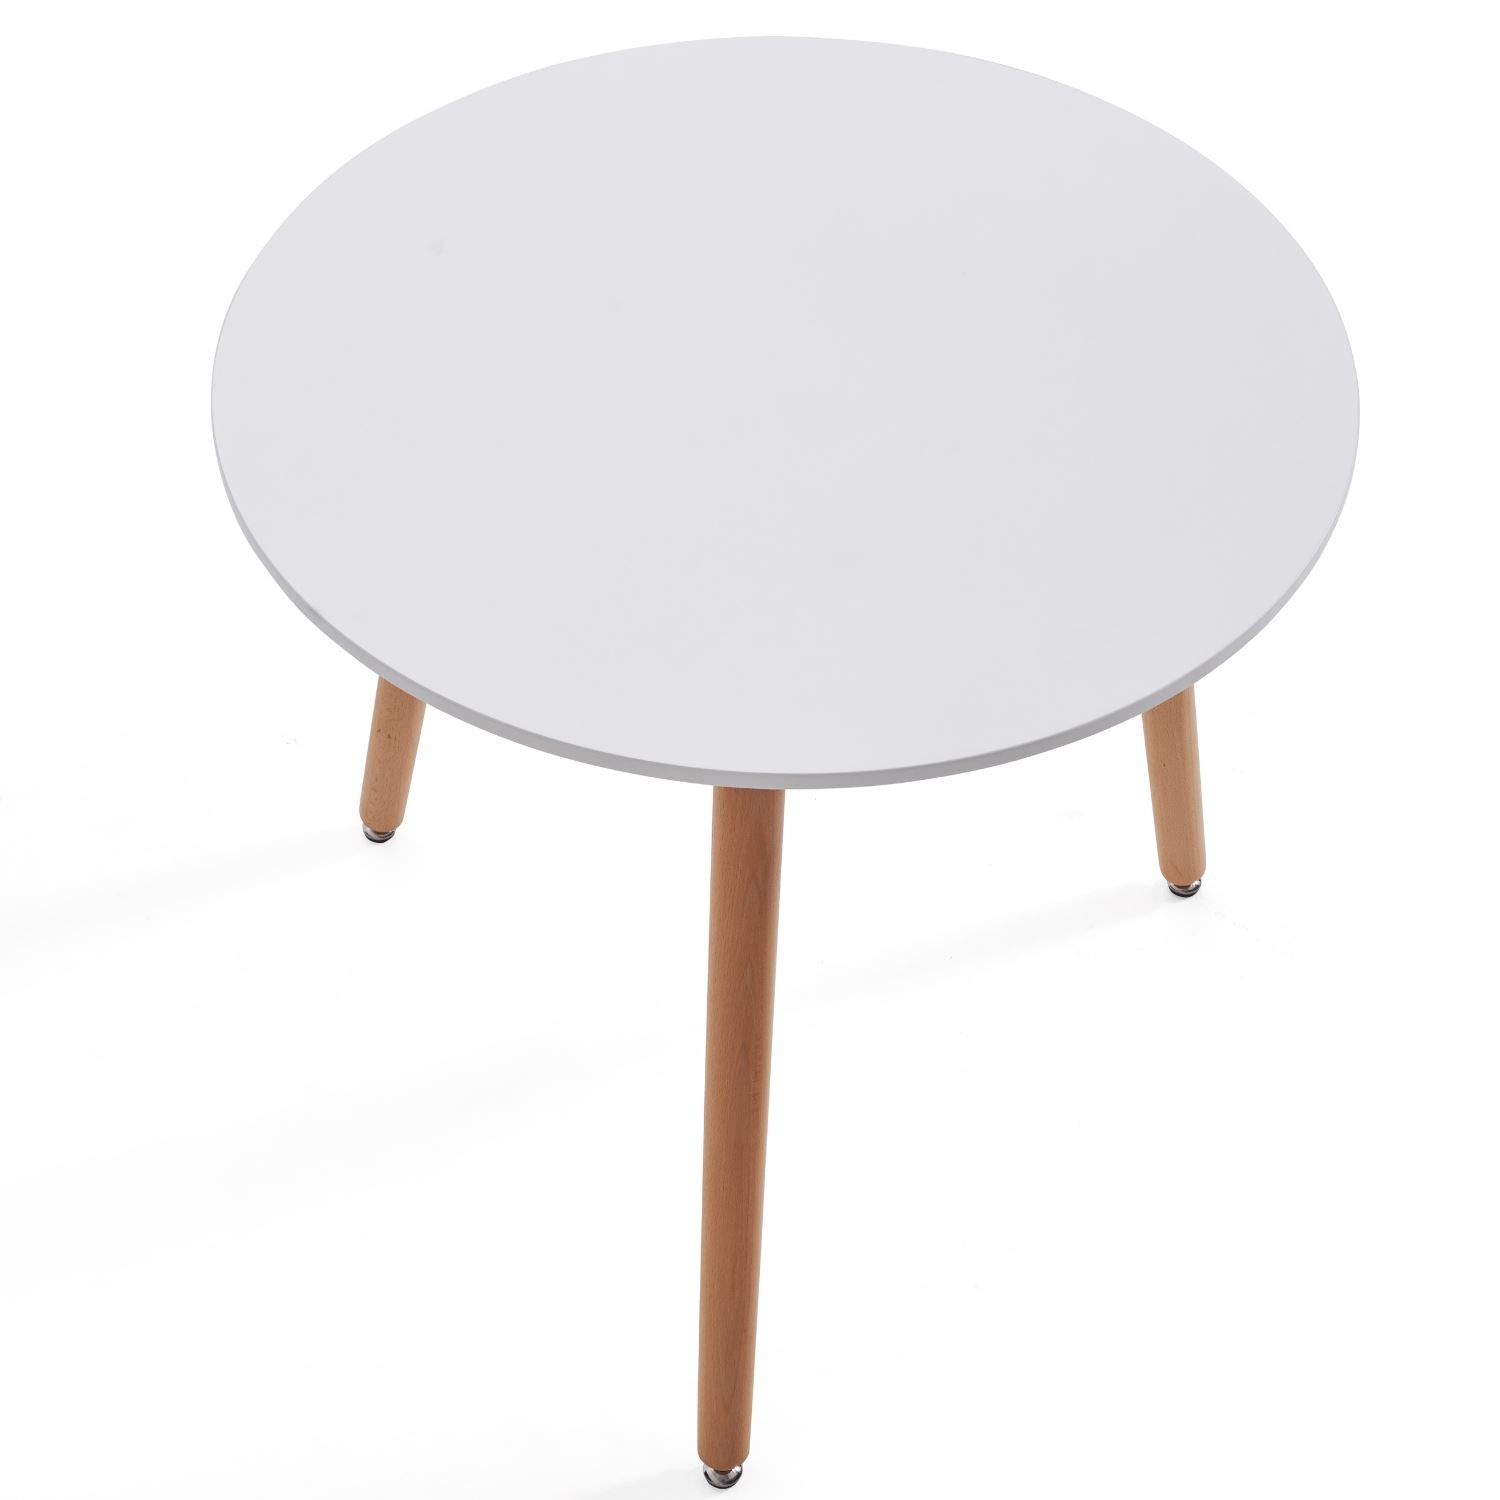 Valmes Table | Valyou Furniture